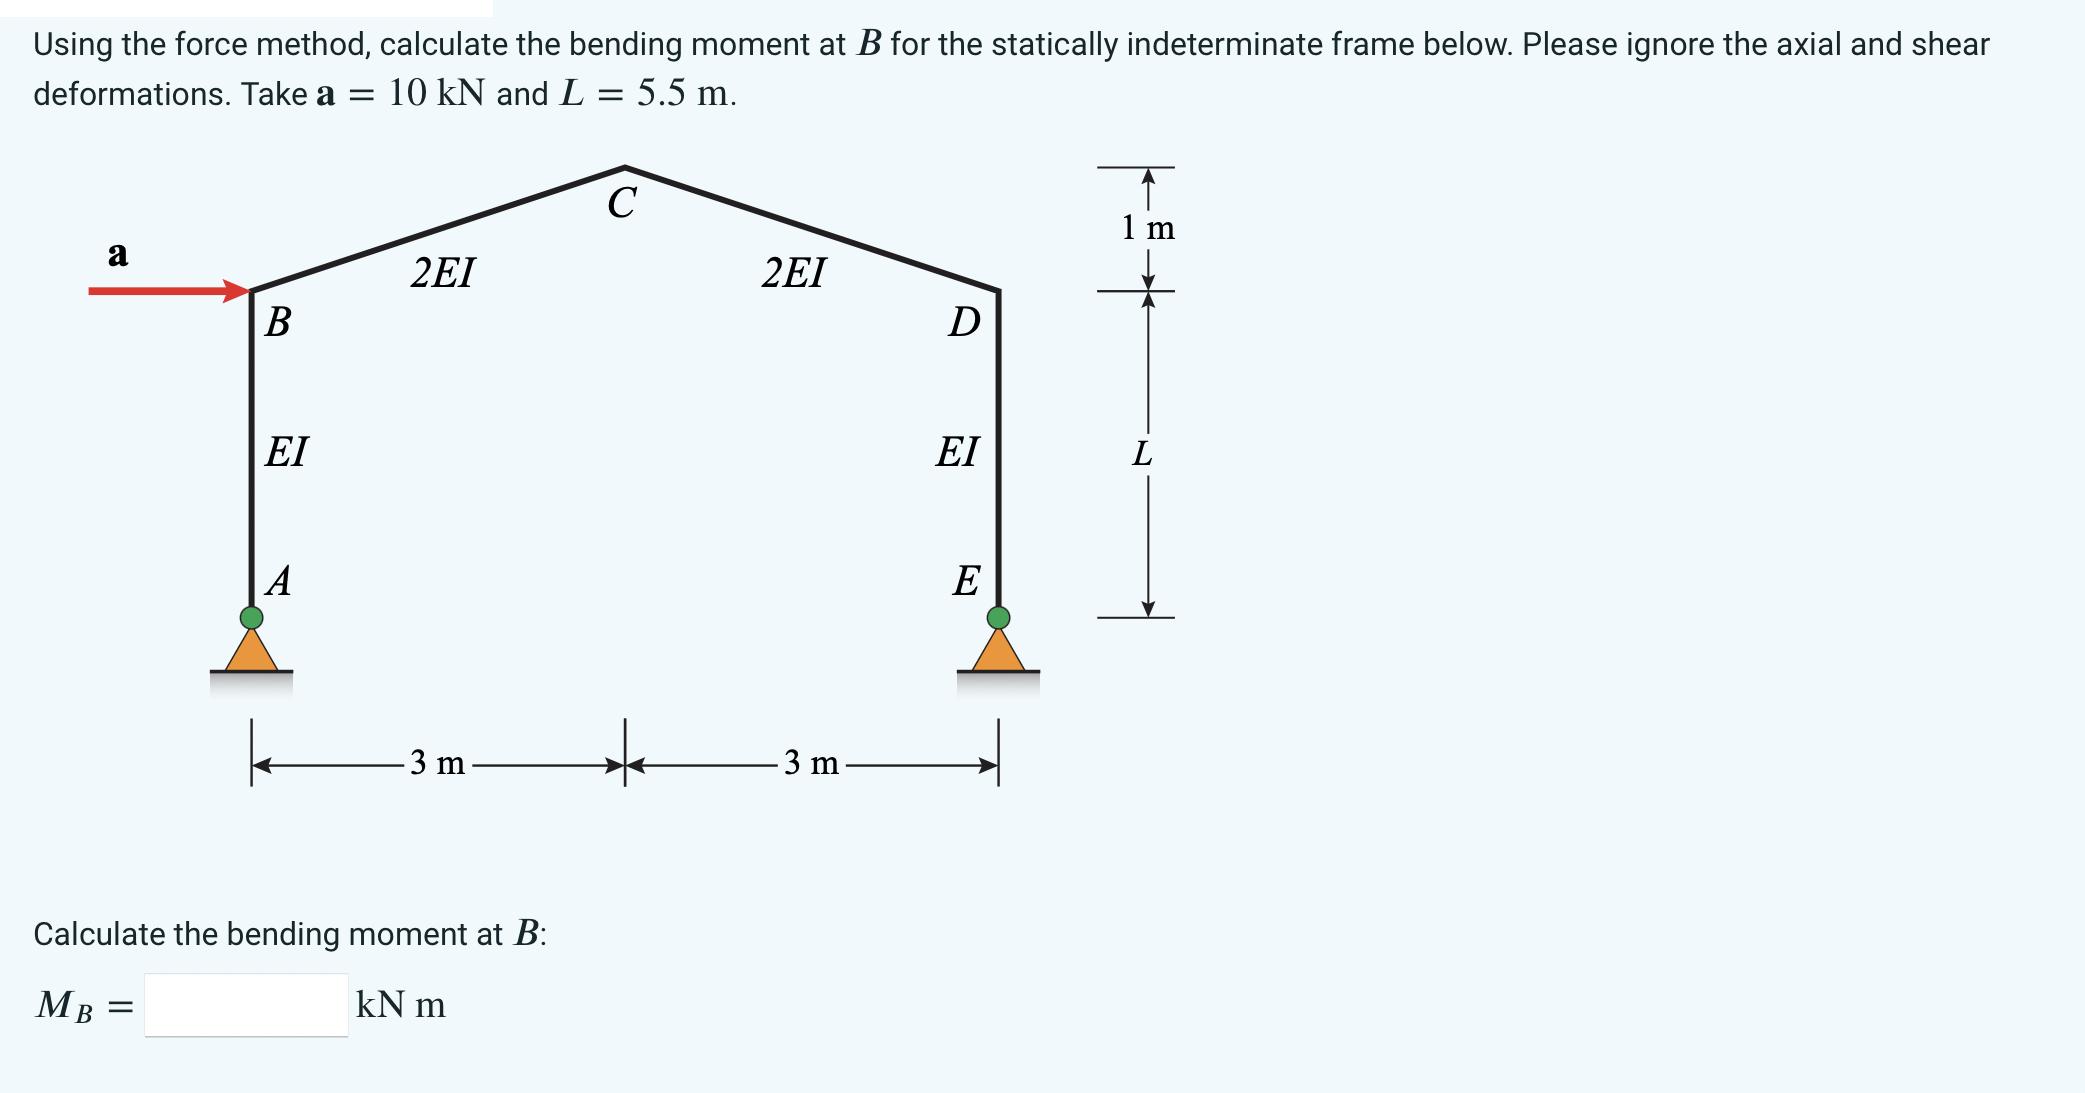 Using the force method, calculate the bending moment at B for the statically indeterminate frame below.